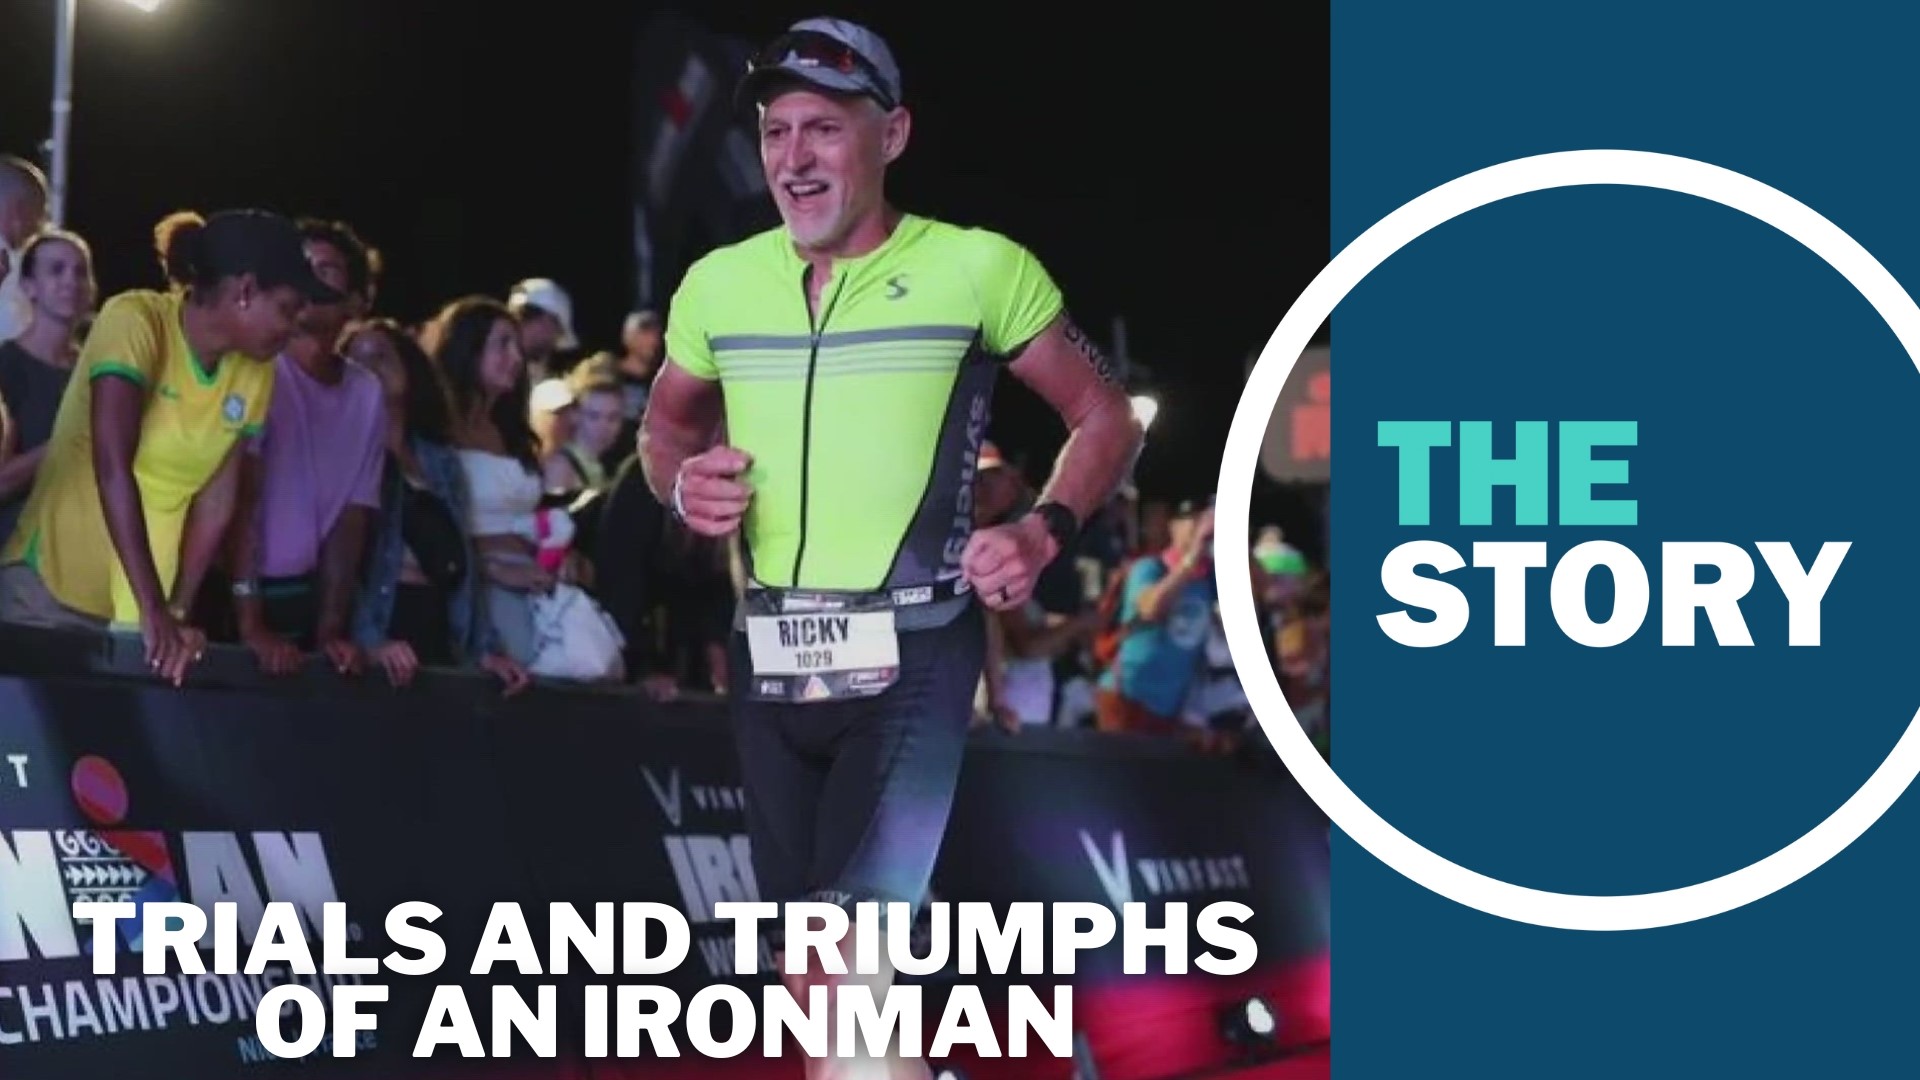 In 2019, Ricky Gray's pelvis was shattered by a fall that almost killed him. A few years later, the 61-year-old made it to the Ironman World Championships.